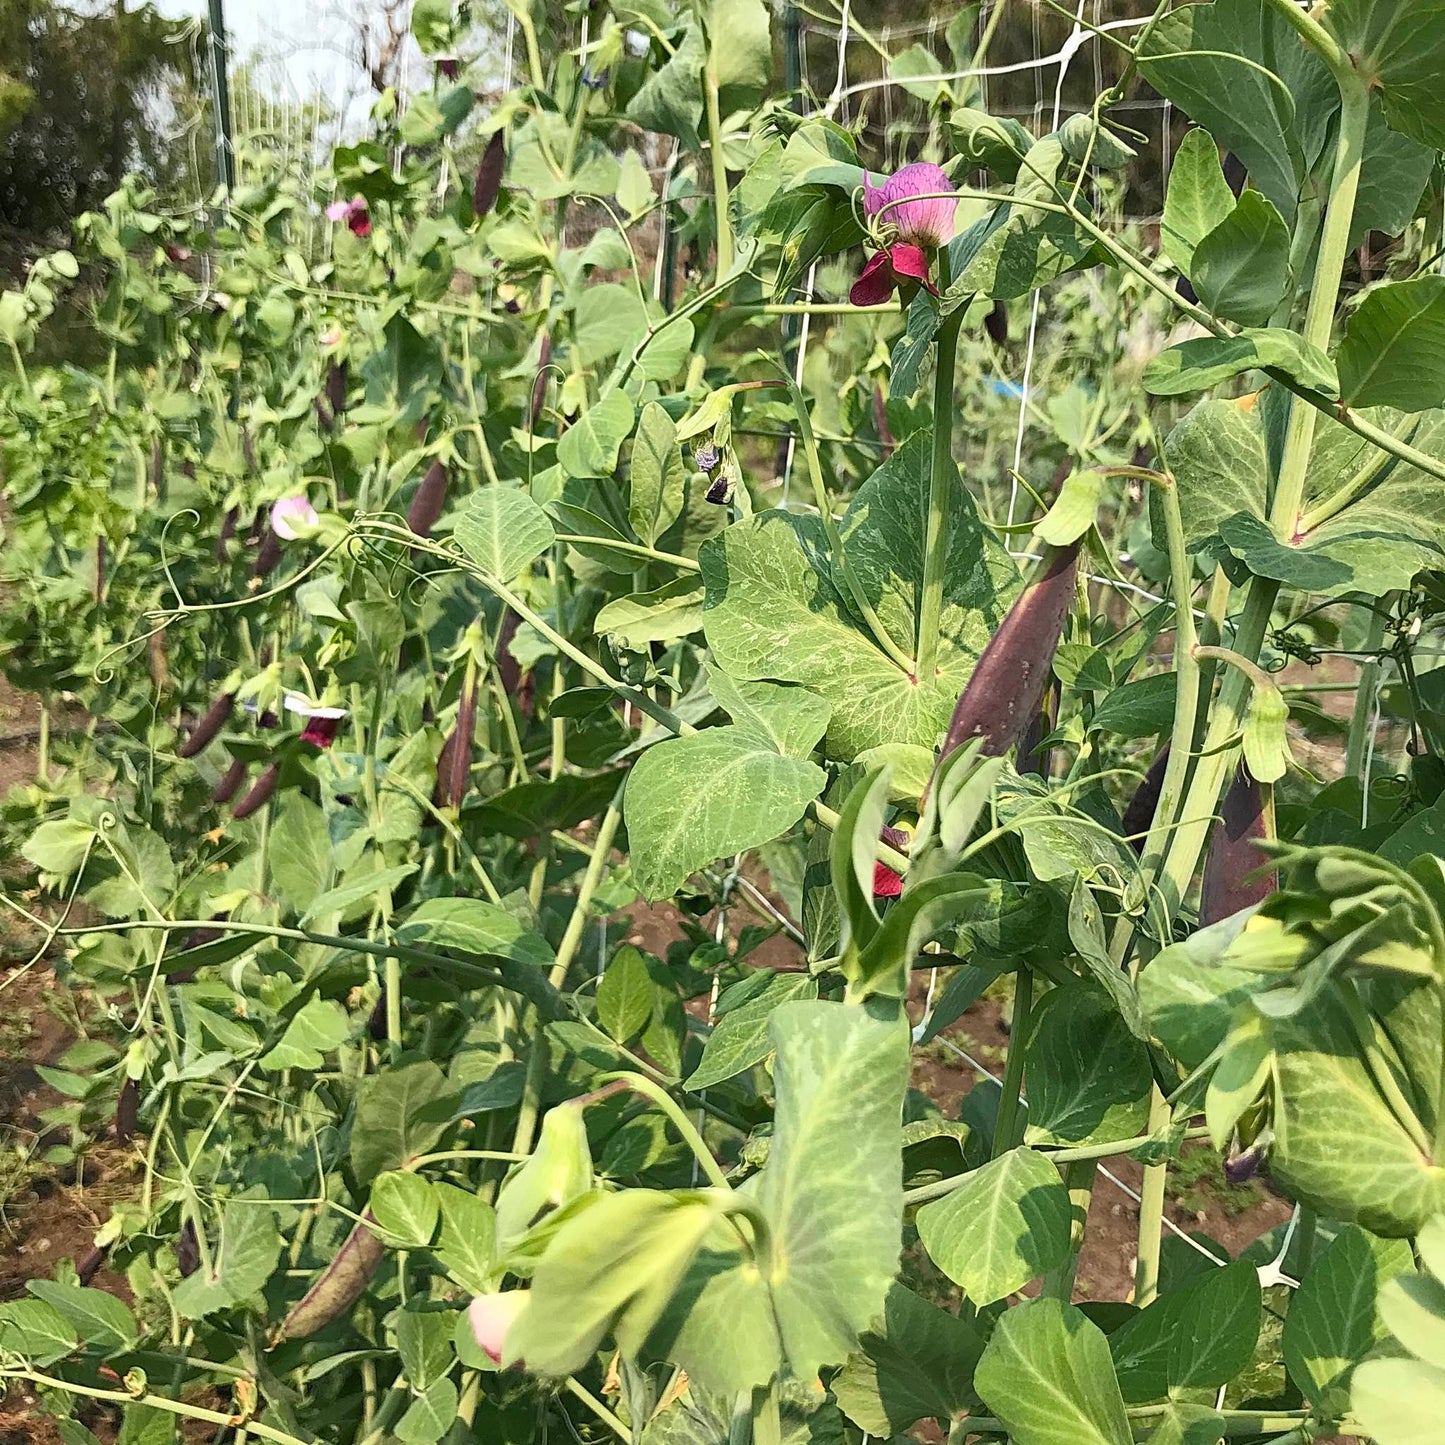 Purple snap peas with pink and lavender flowers on a trellis.